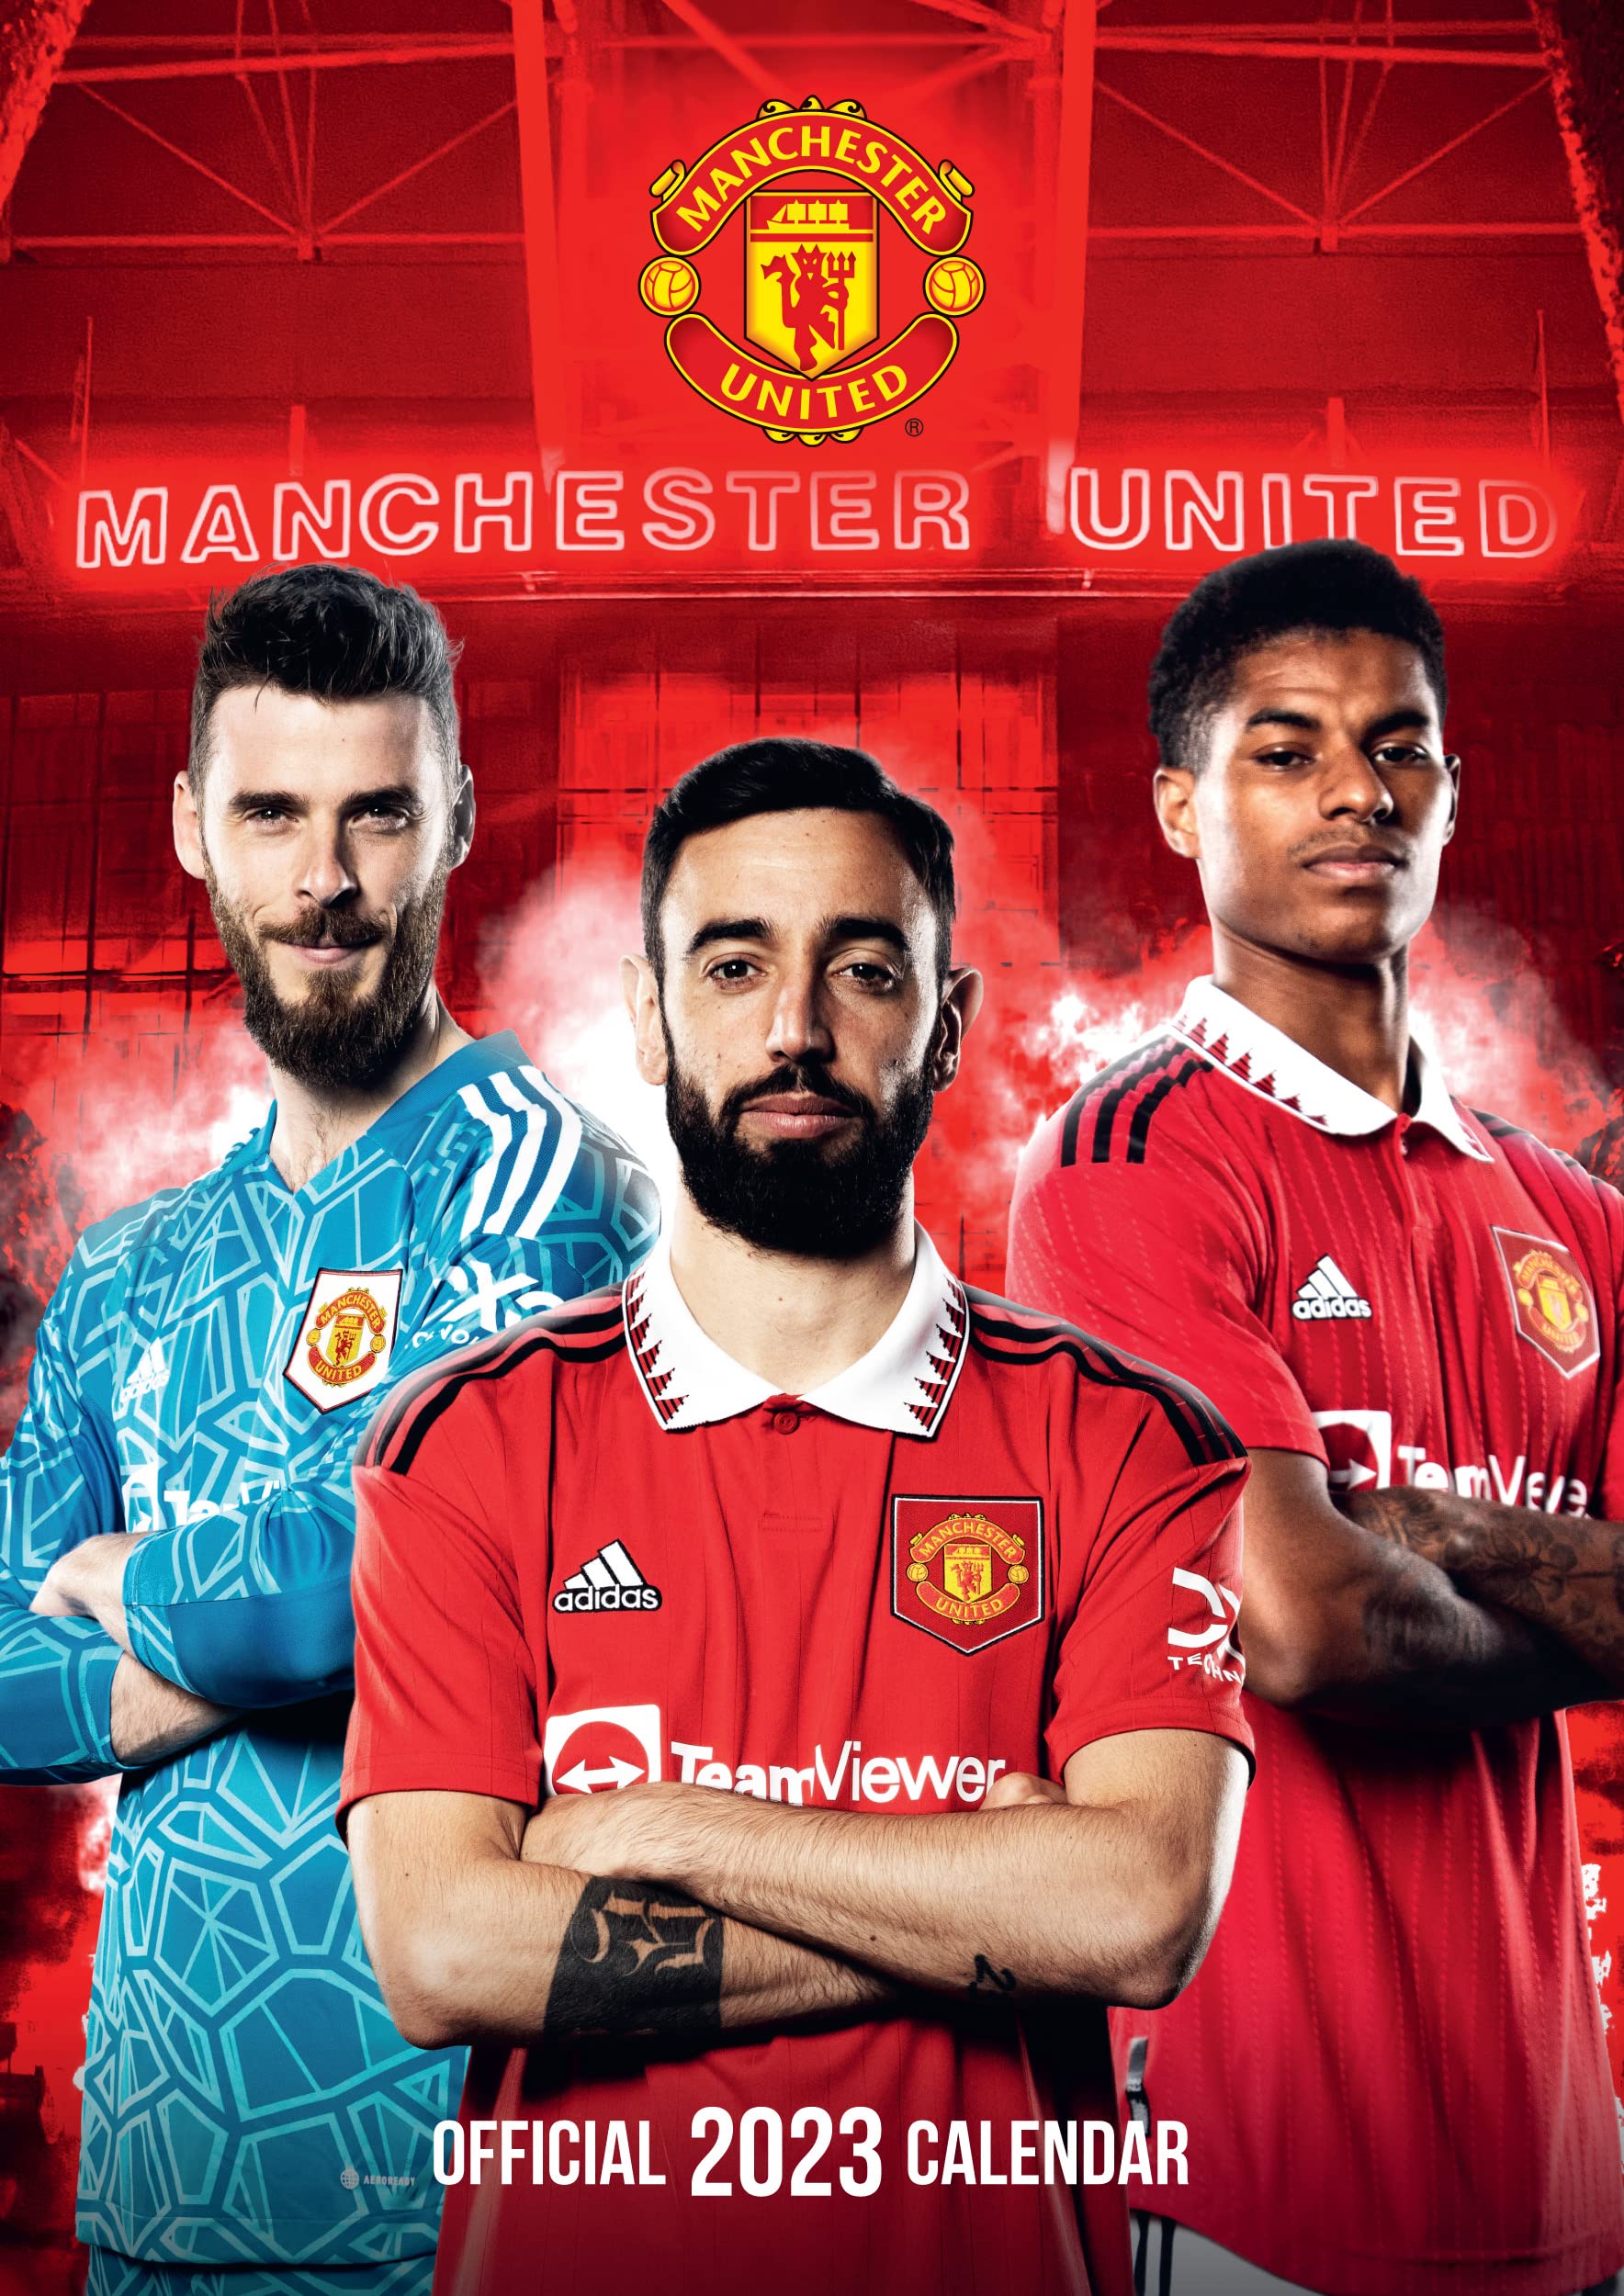 Manchester United FC 2023 Calendar, Month To View A3 Wall Calendar, Official Product, Danilo Promotions LTD: Amazon.co.uk: Books